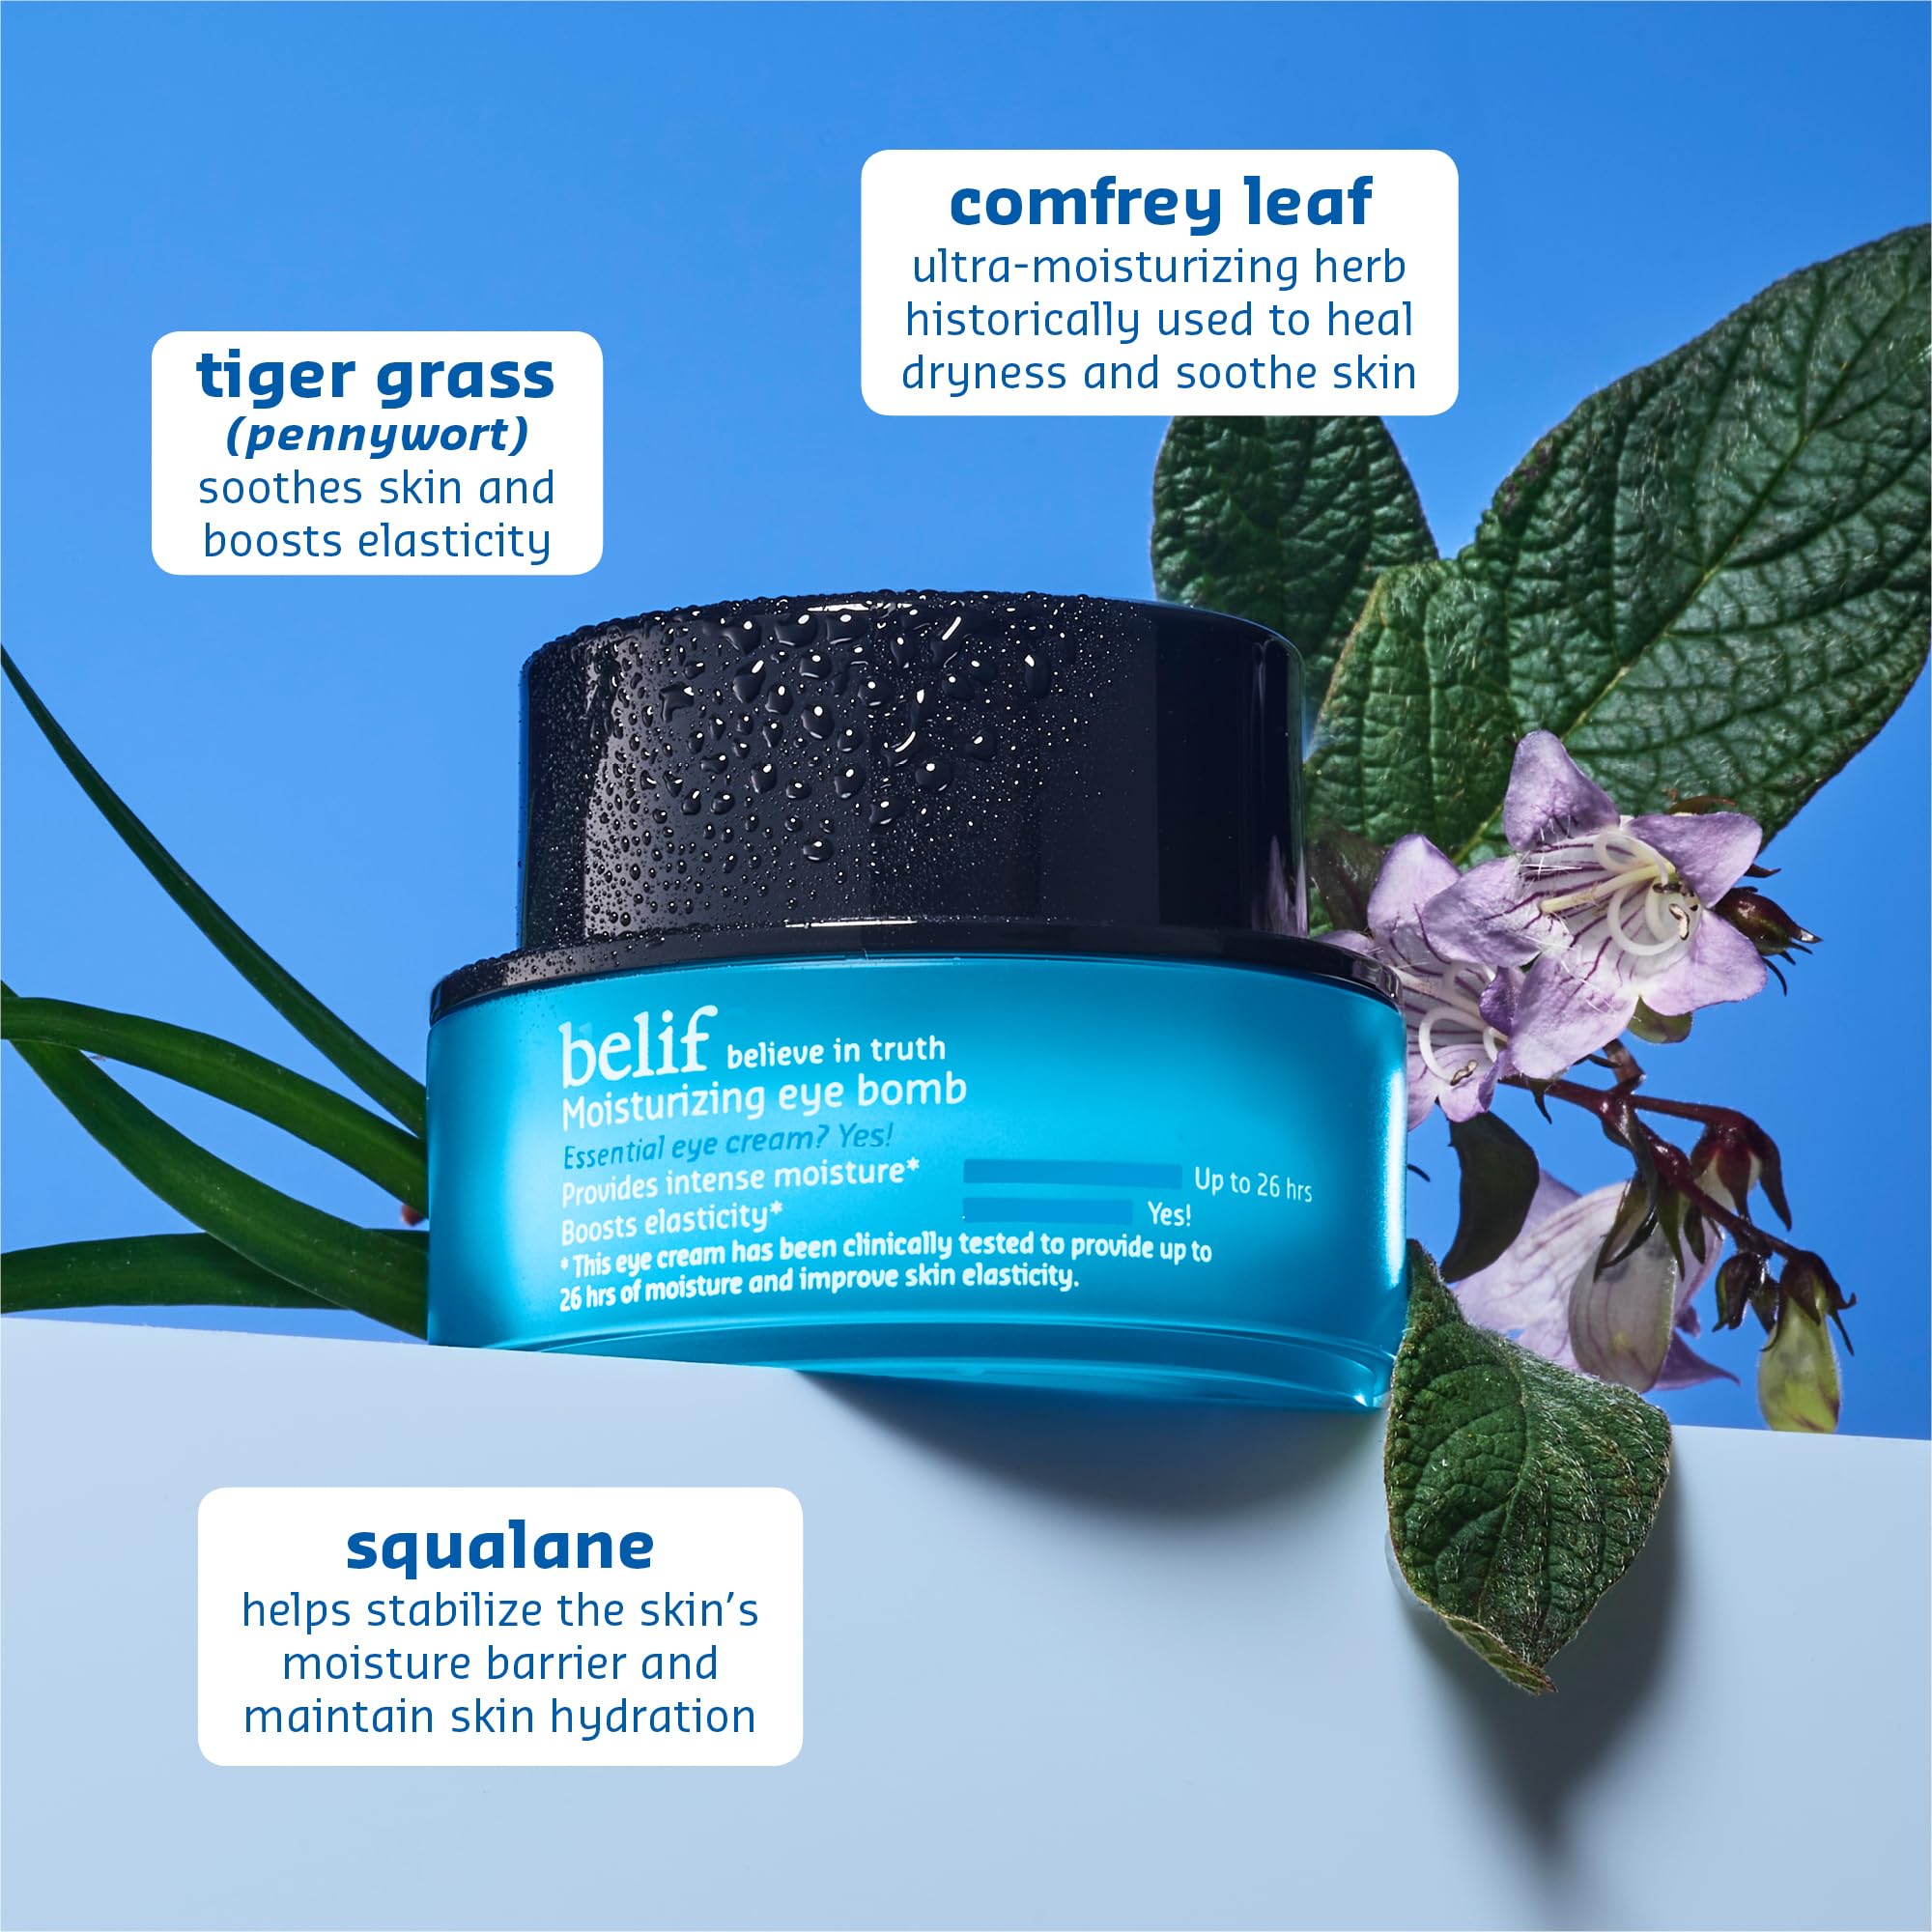 belif Moisturizing Eye Bomb | Reduce Puffiness, Lines & Dark Circles | Under Eye Cream for Wrinkle Care | Clinically Proven 26 Hour Hydration for Younger Looking Eyes | for All Skin Types | .84 floz